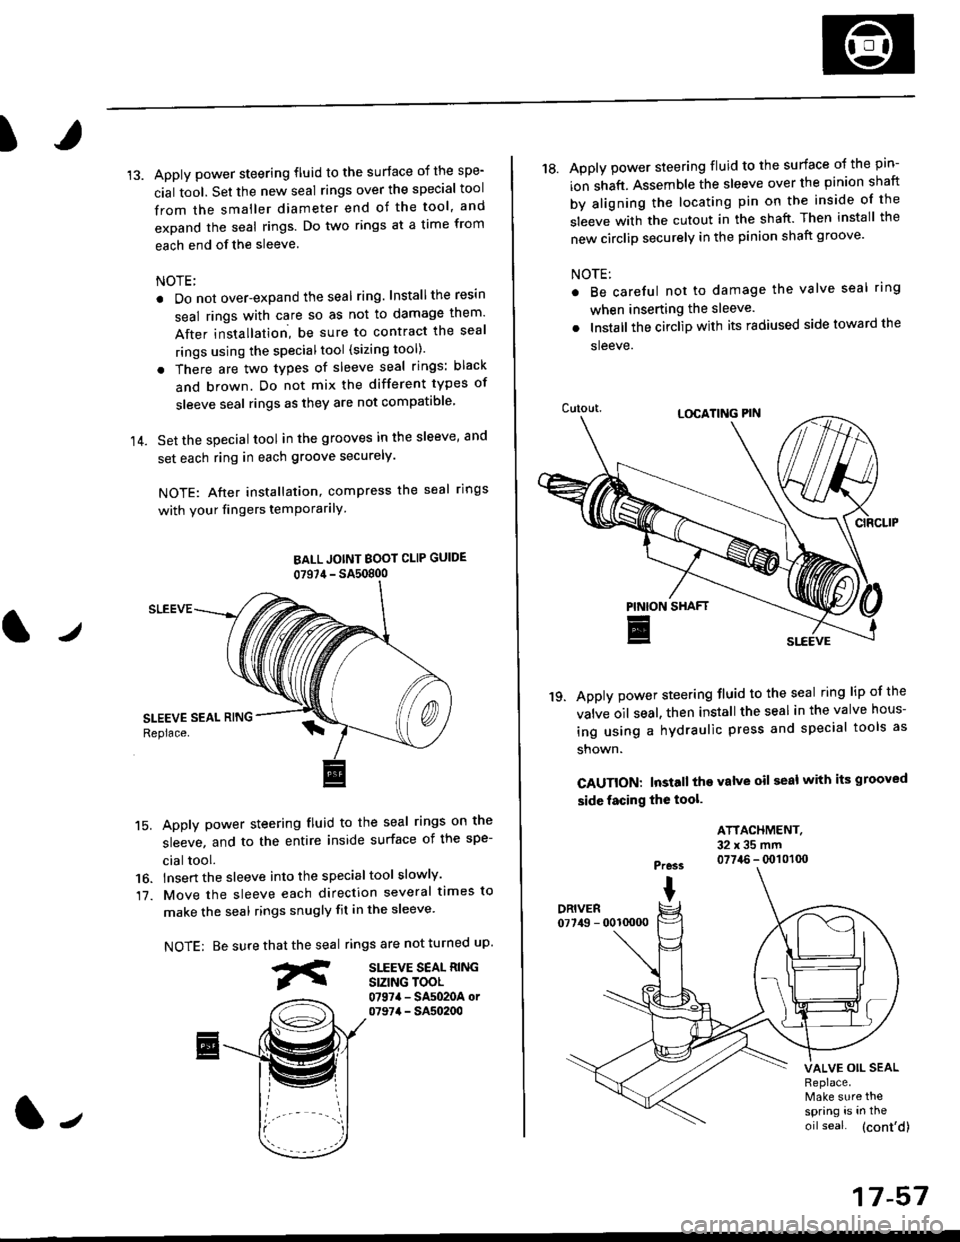 HONDA CIVIC 1996 6.G Owners Manual I
14.
Apply power steering fluid to the surface of the spe-
cial tool. Set the new seal rings over the special tool
from the smaller diameter end of the tool, and
expand the seal rings. Do two rings a